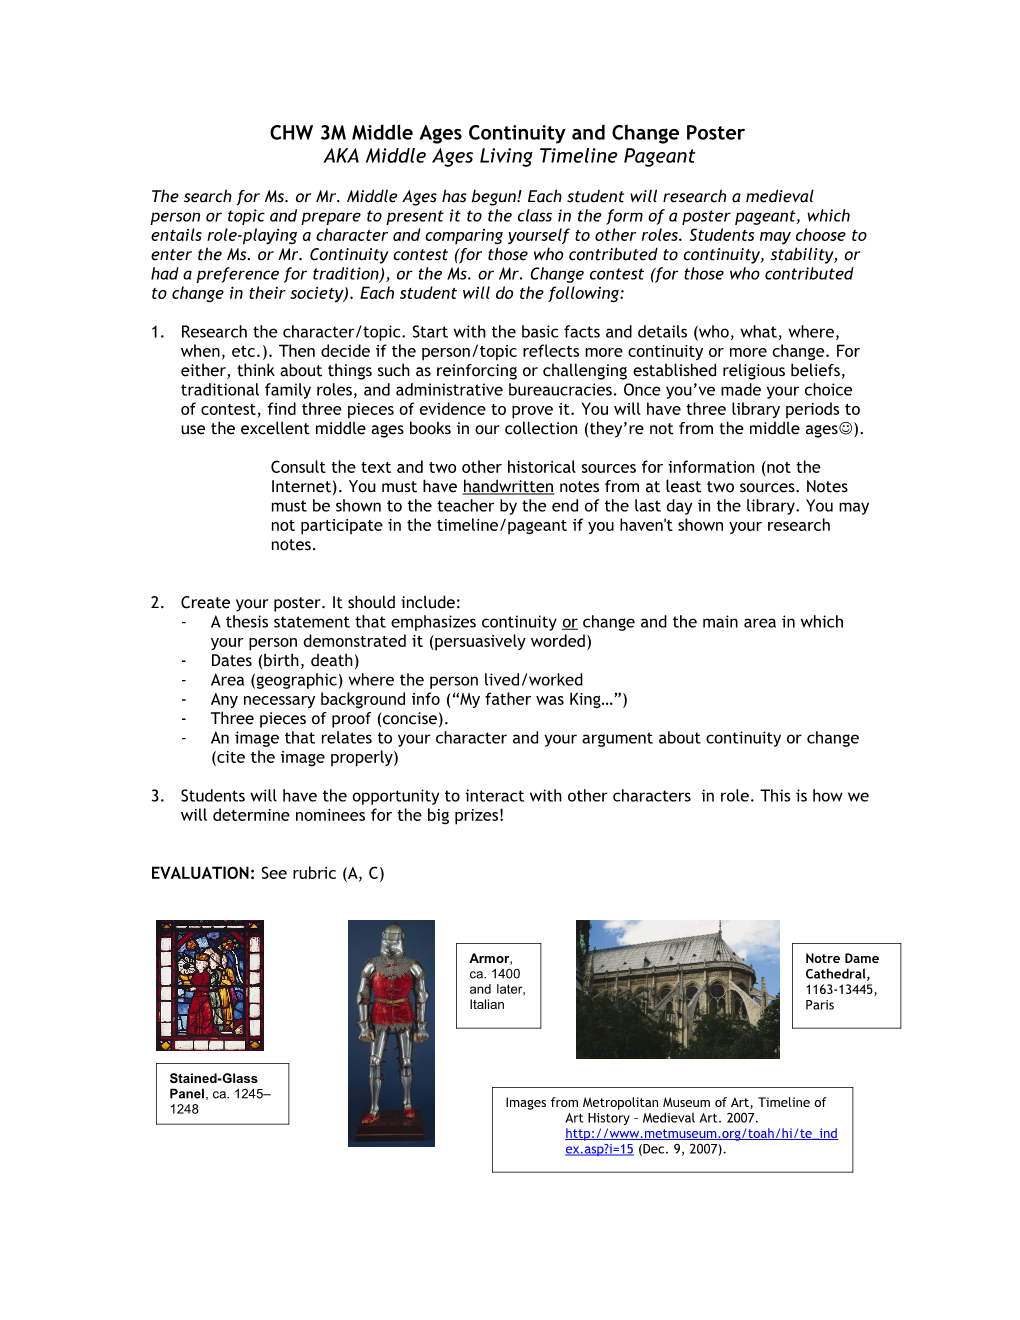 CHW 3M Middle Ages Living Timeline Pageant